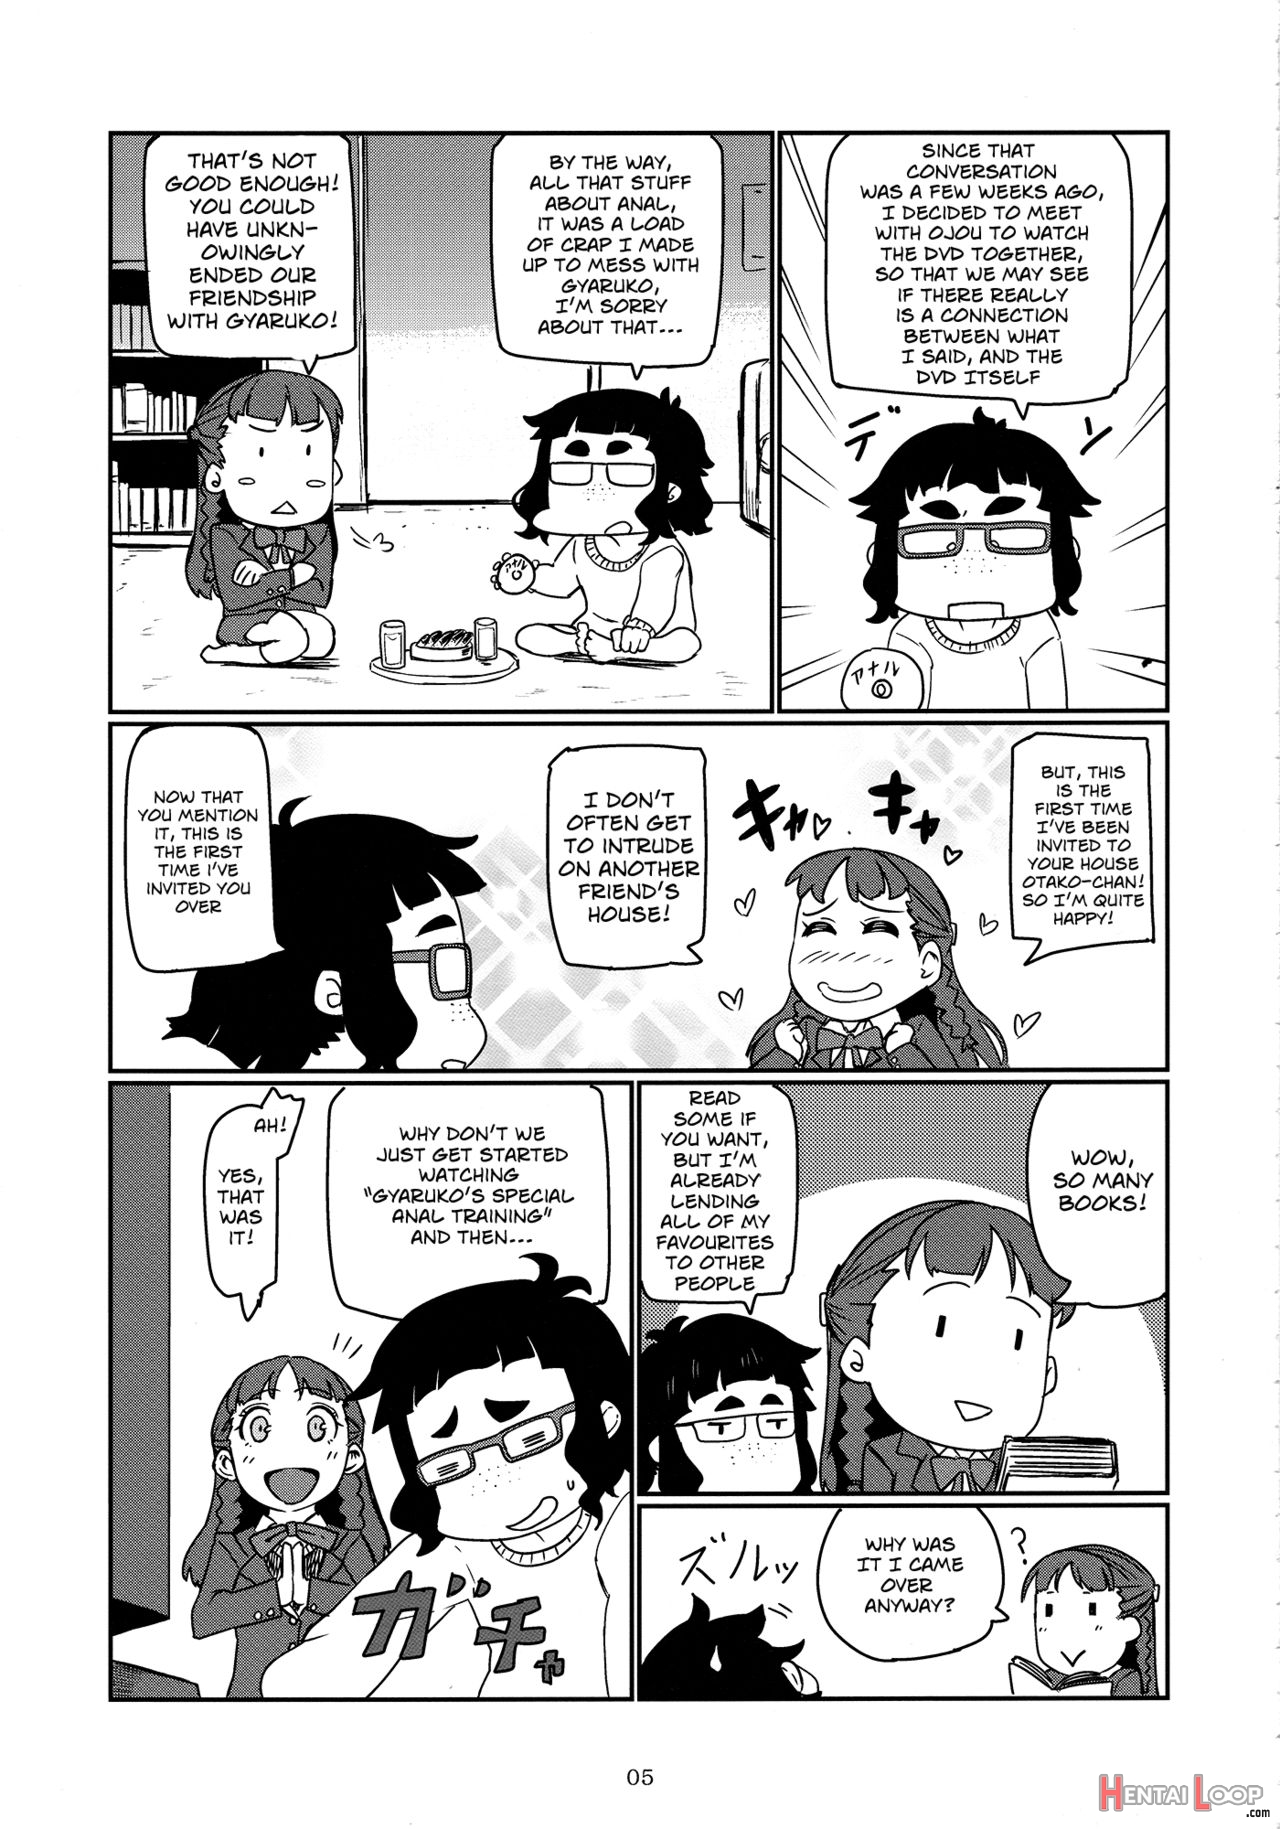 Galko Ah! page 4